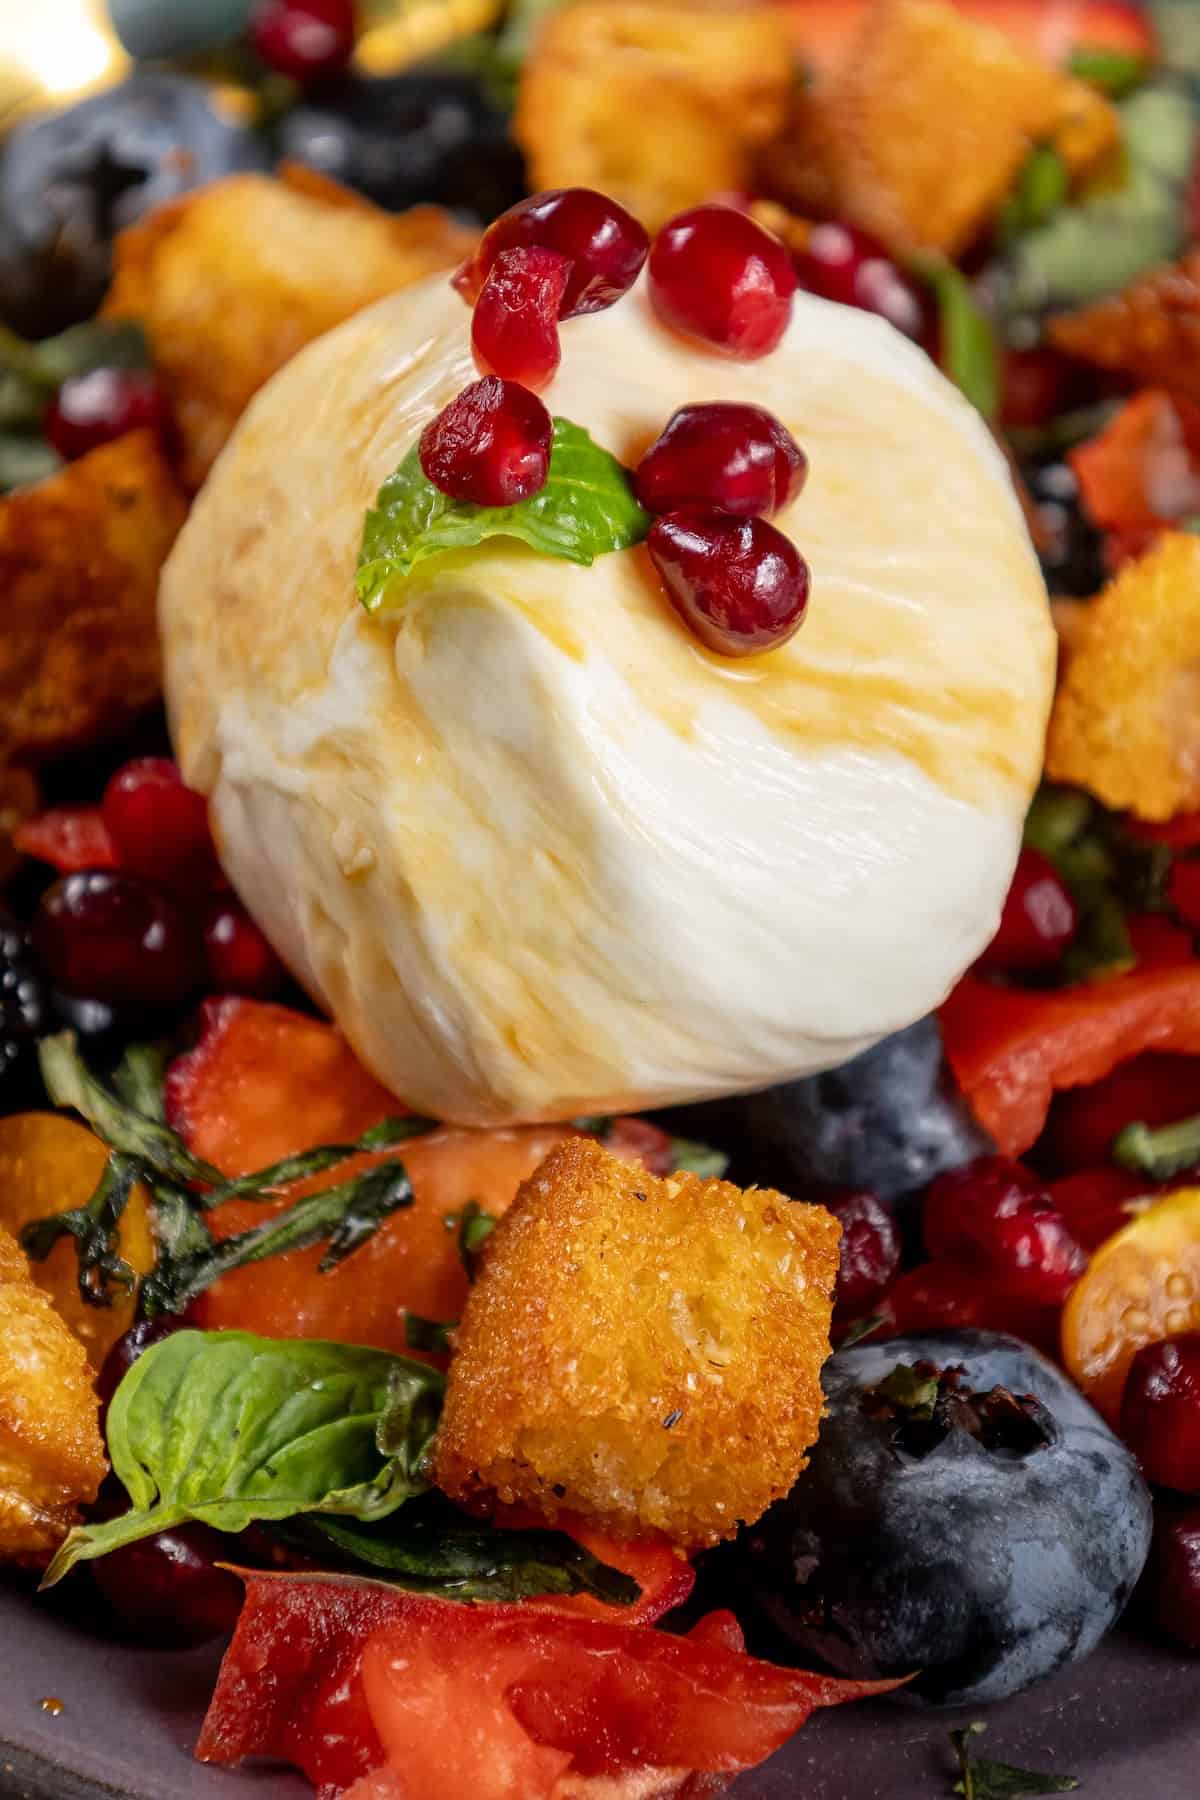 A salad with berries and a pomegranate sorbet.